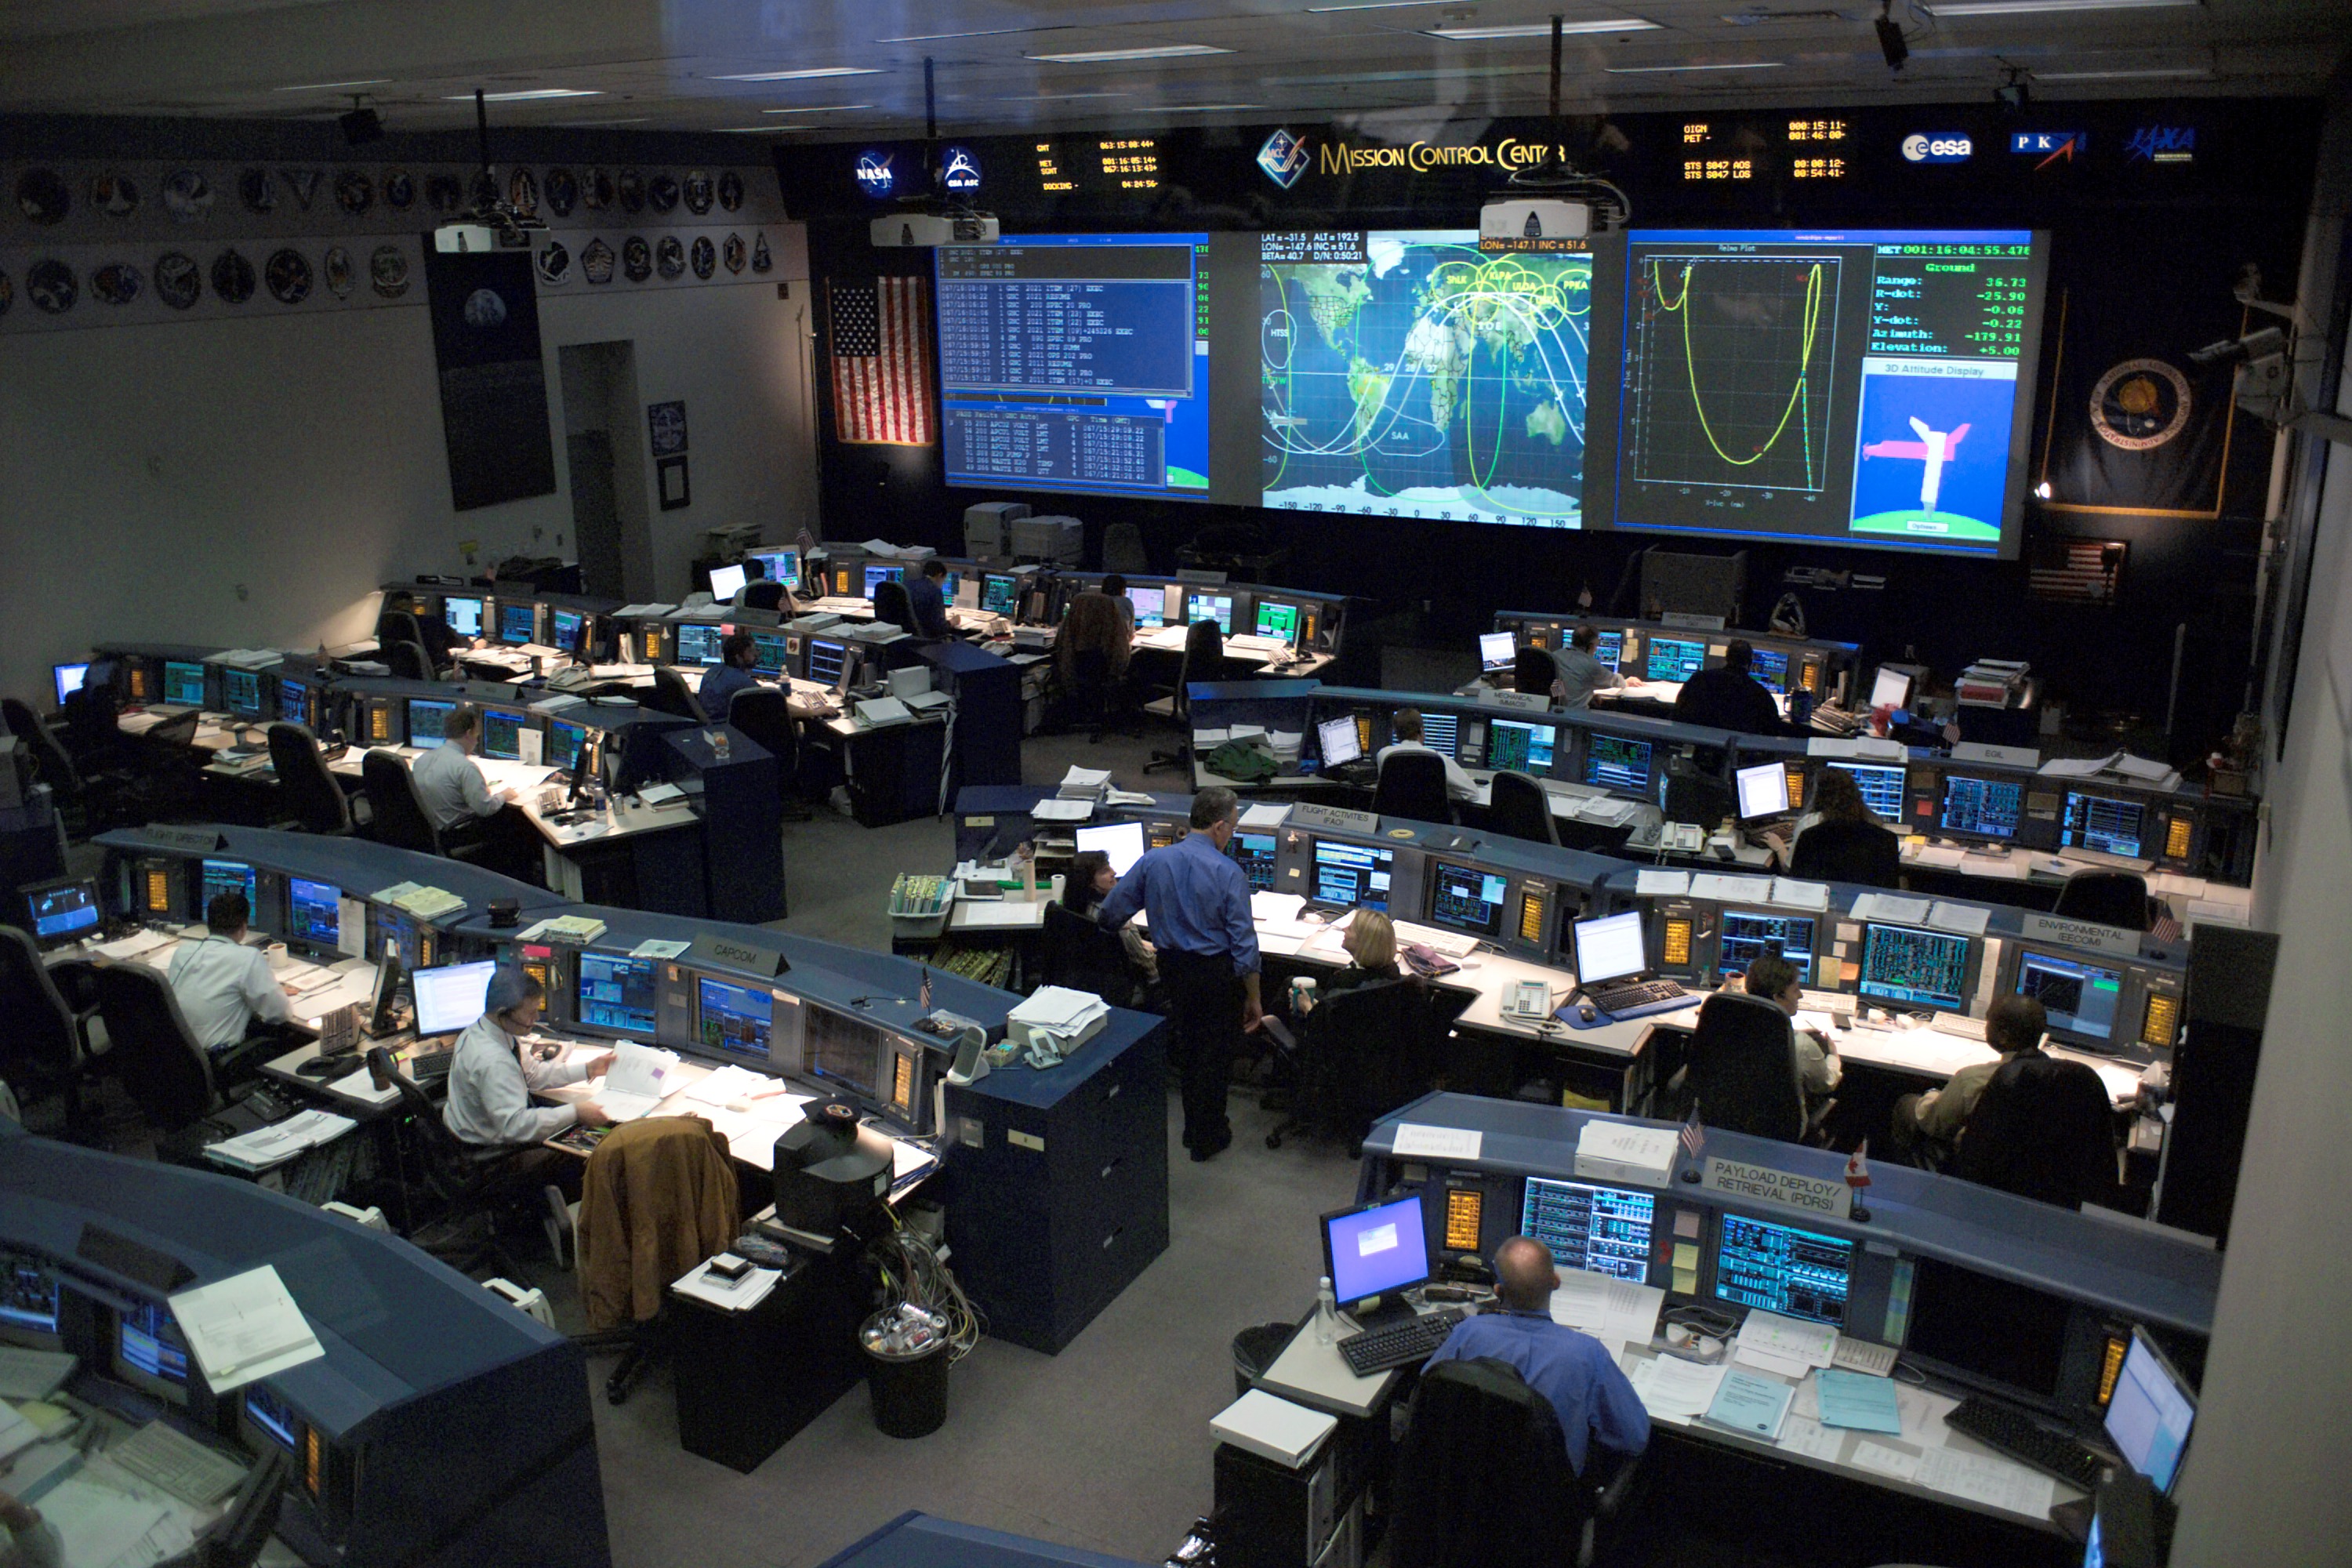 File:Mission control center.jpg - Wikimedia Commons